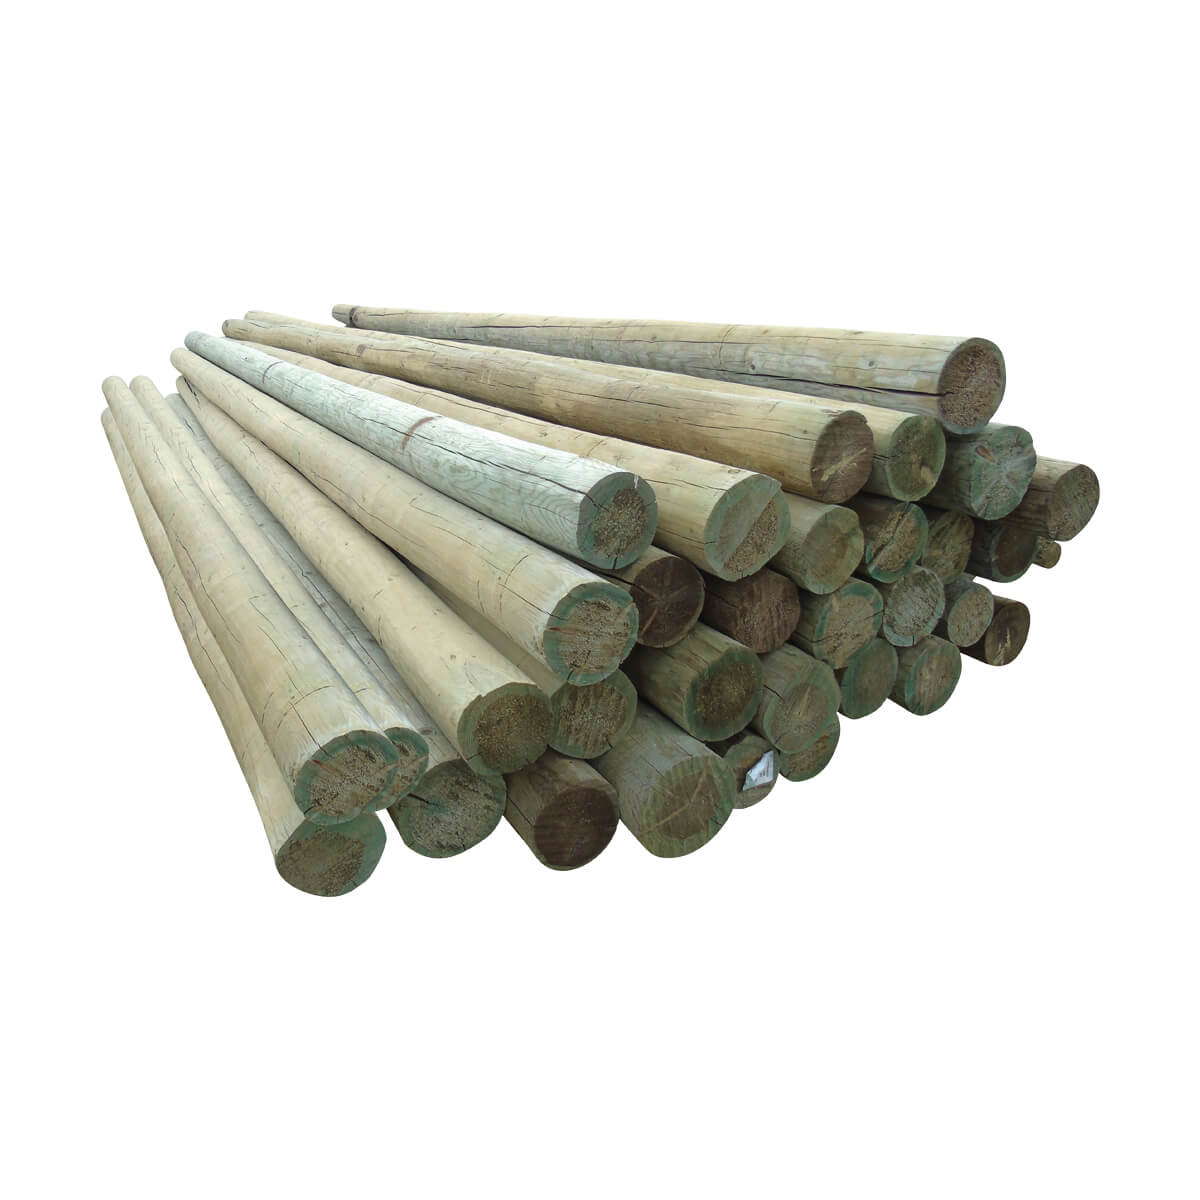 Peeled Fence Poles - Blunt - 6-in x 8-ft